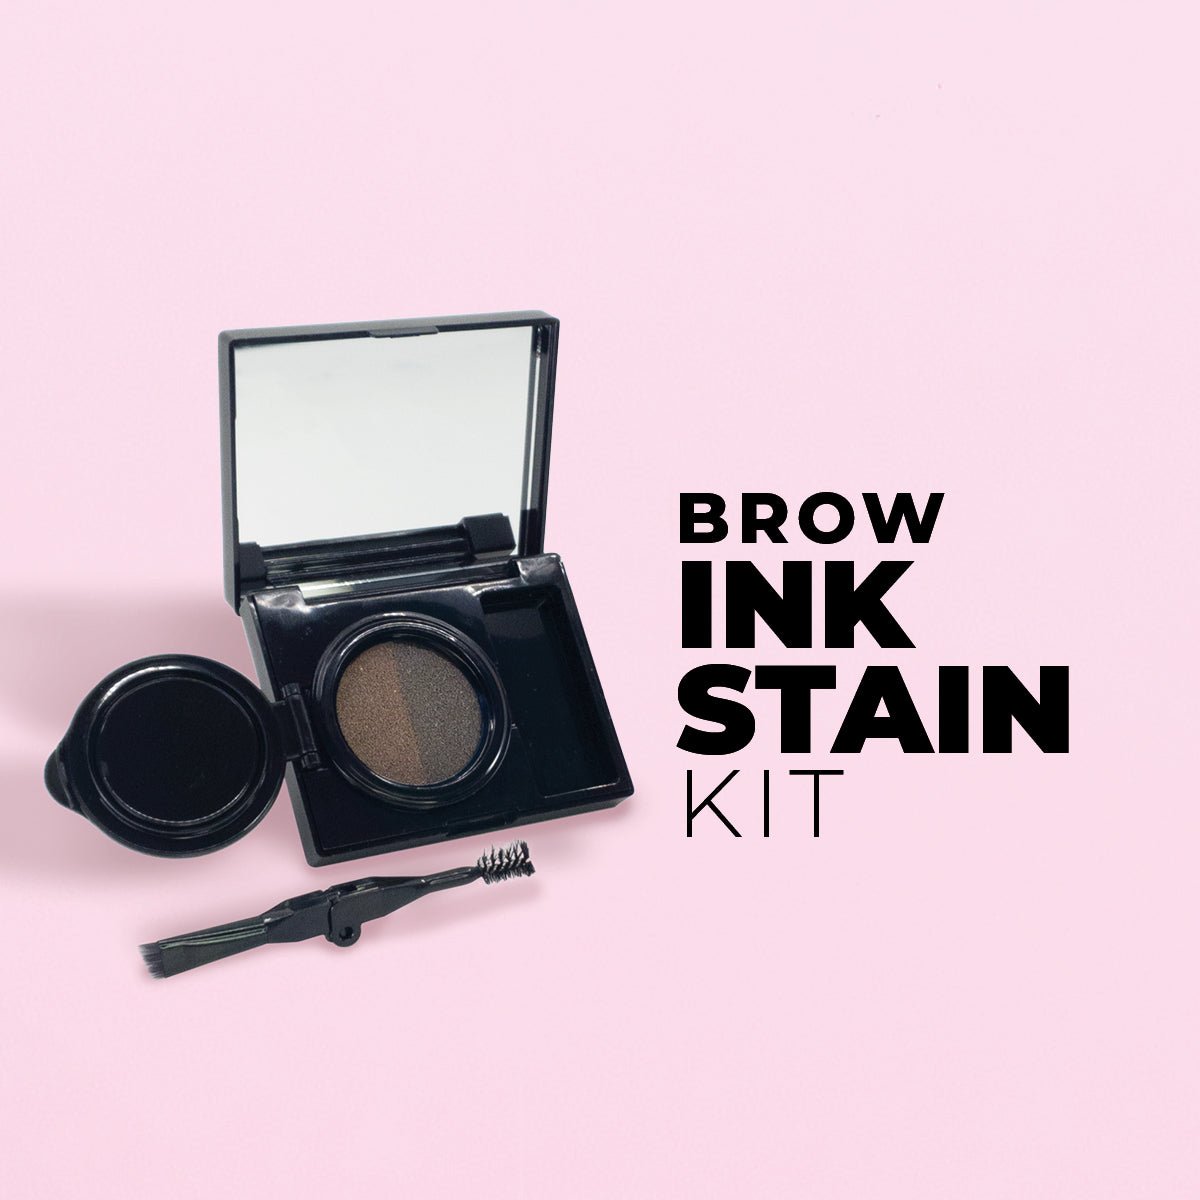 Brow Ink Stain Kit - One V Salon